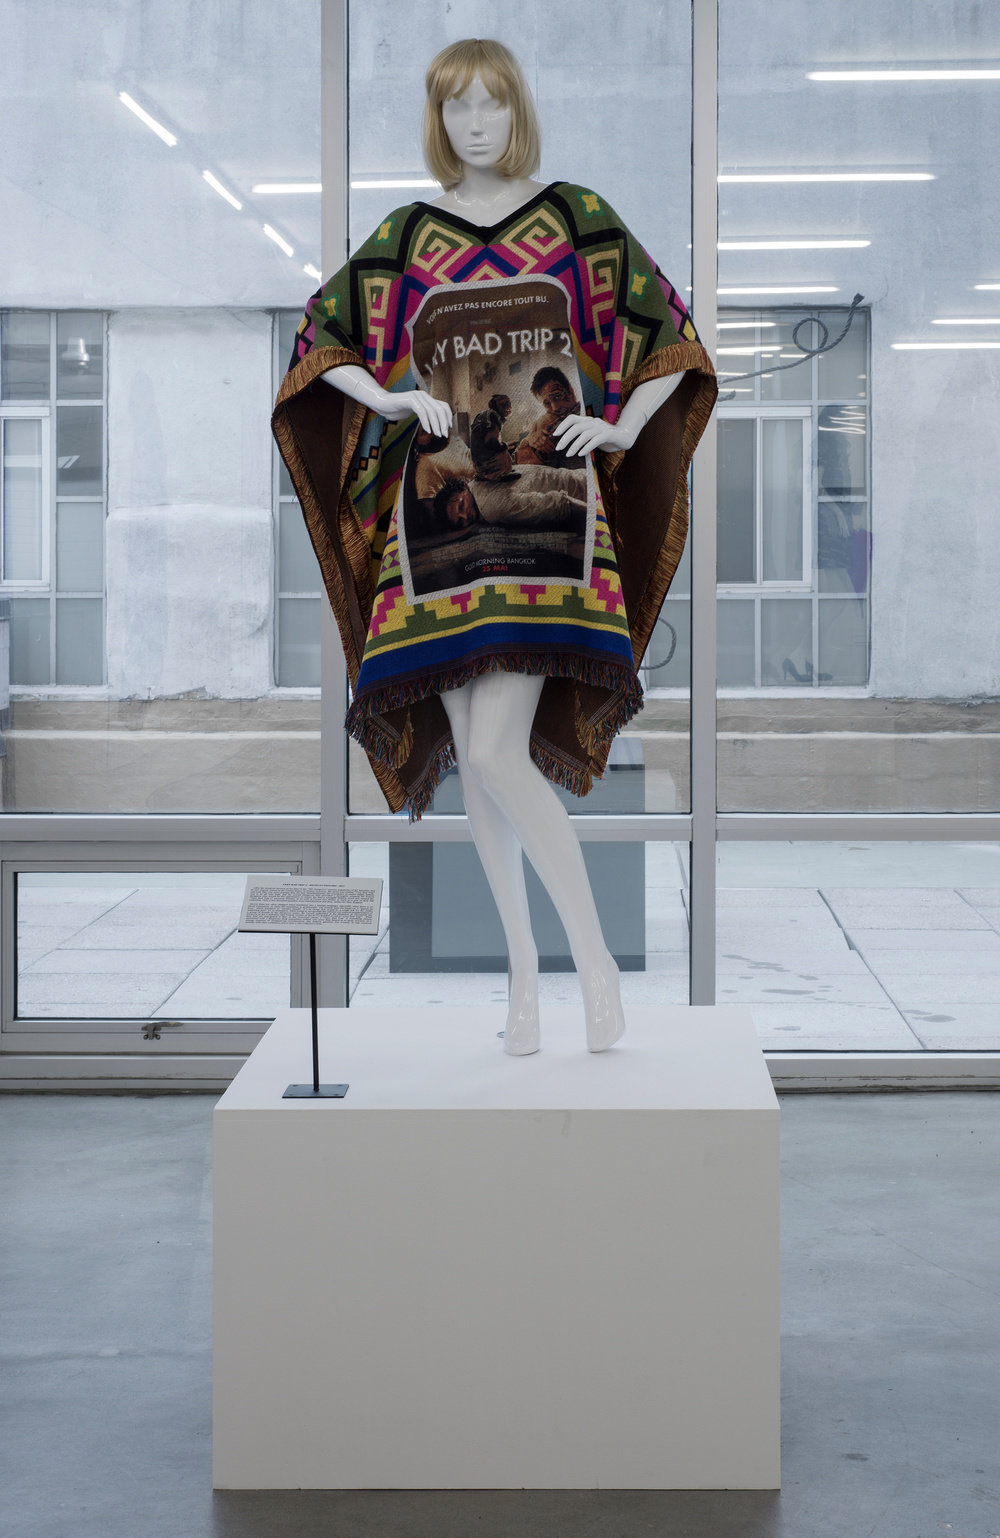 Slife, very bad trip 2 poncho, 2014, jacquard woven poly cotton afghan, mdf, fiberglass mannequin, synthetic wig, store bought sunglasses and shoes, 97 x 36 x 36 in. 246.38 x 91.44 x 91.44 cm cnon 55.690 photo credit bill orcutt